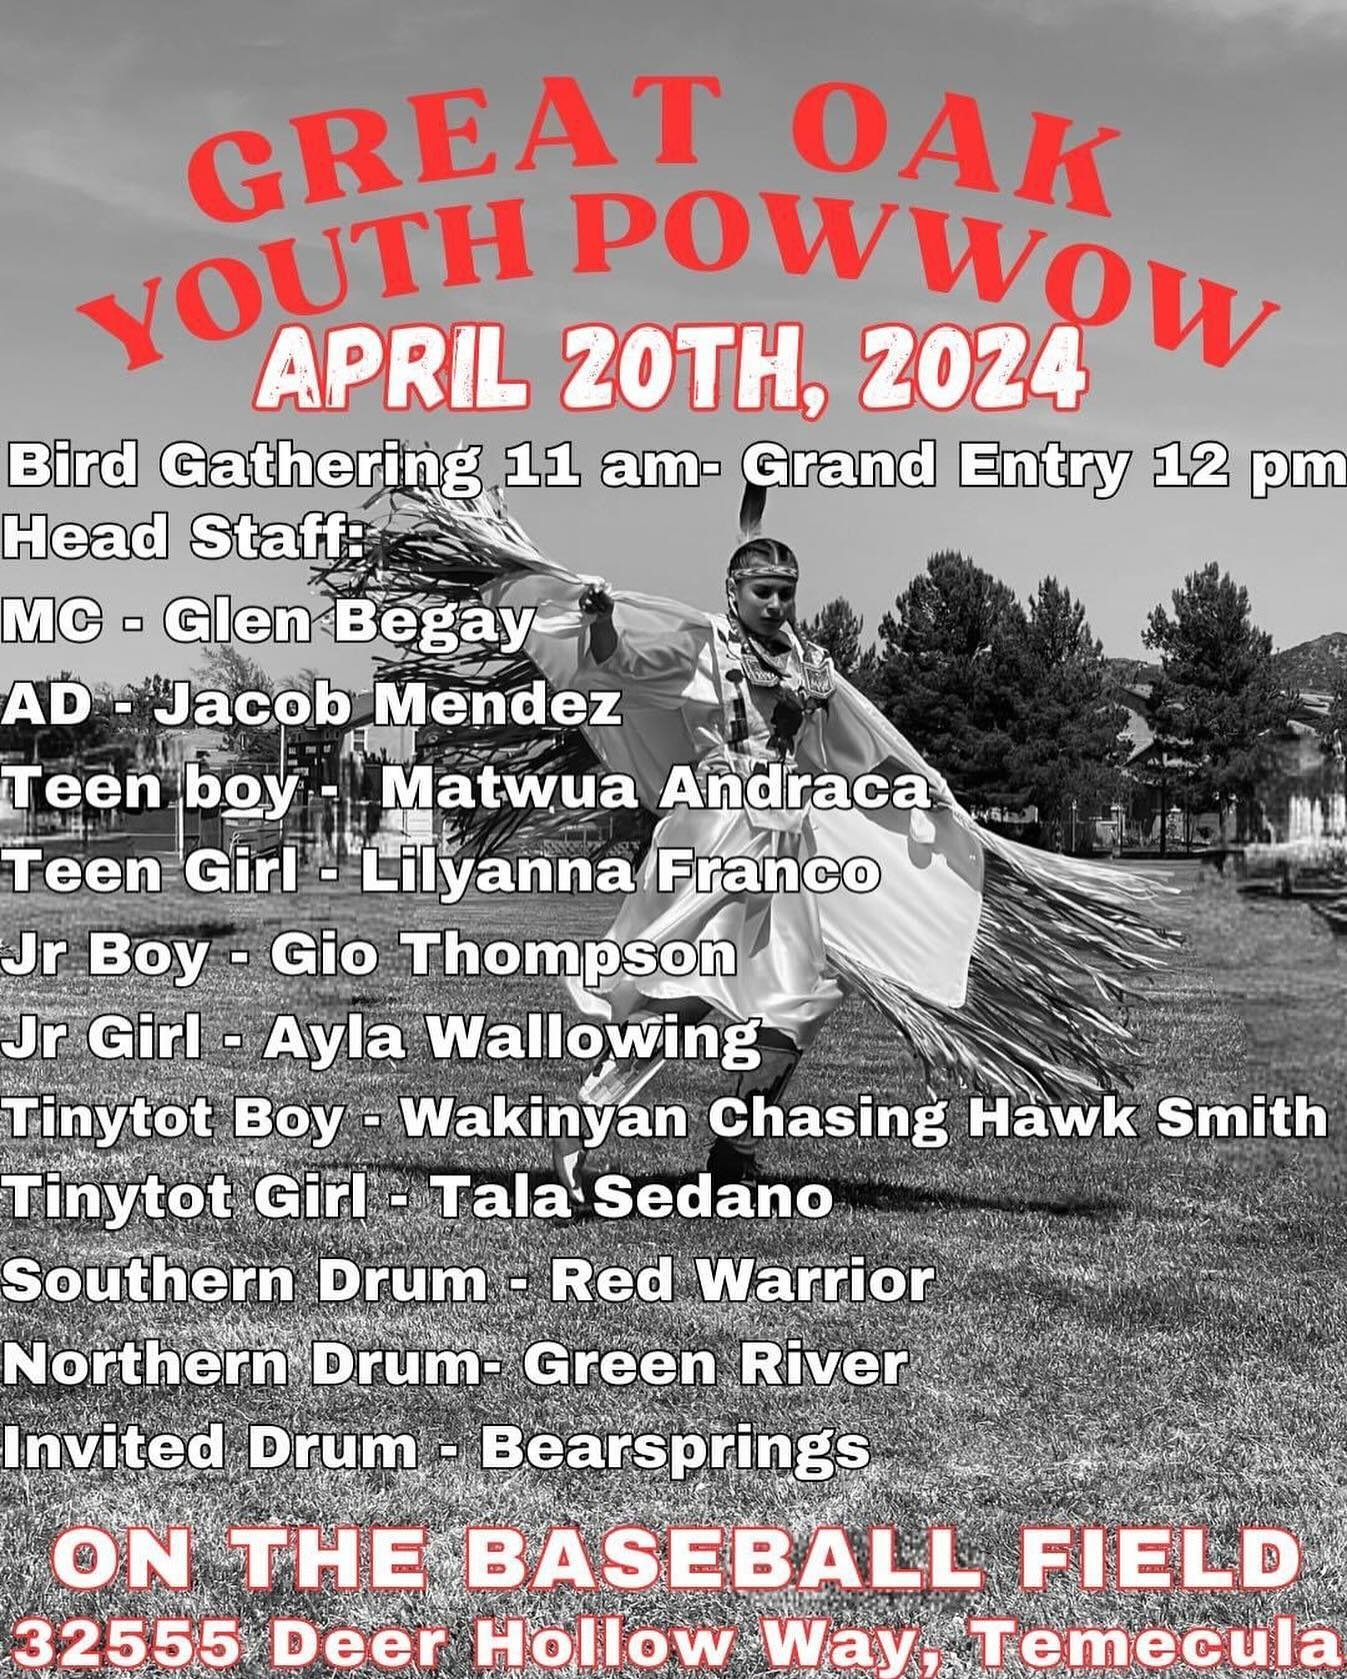 Come and see me this weekend at the Great Oak HS Pow Wow! This will be my first pow wow booth of the year!!

#beadwork #beadedearrings #beadedearringsforsale #native #nativemade #indigenousart